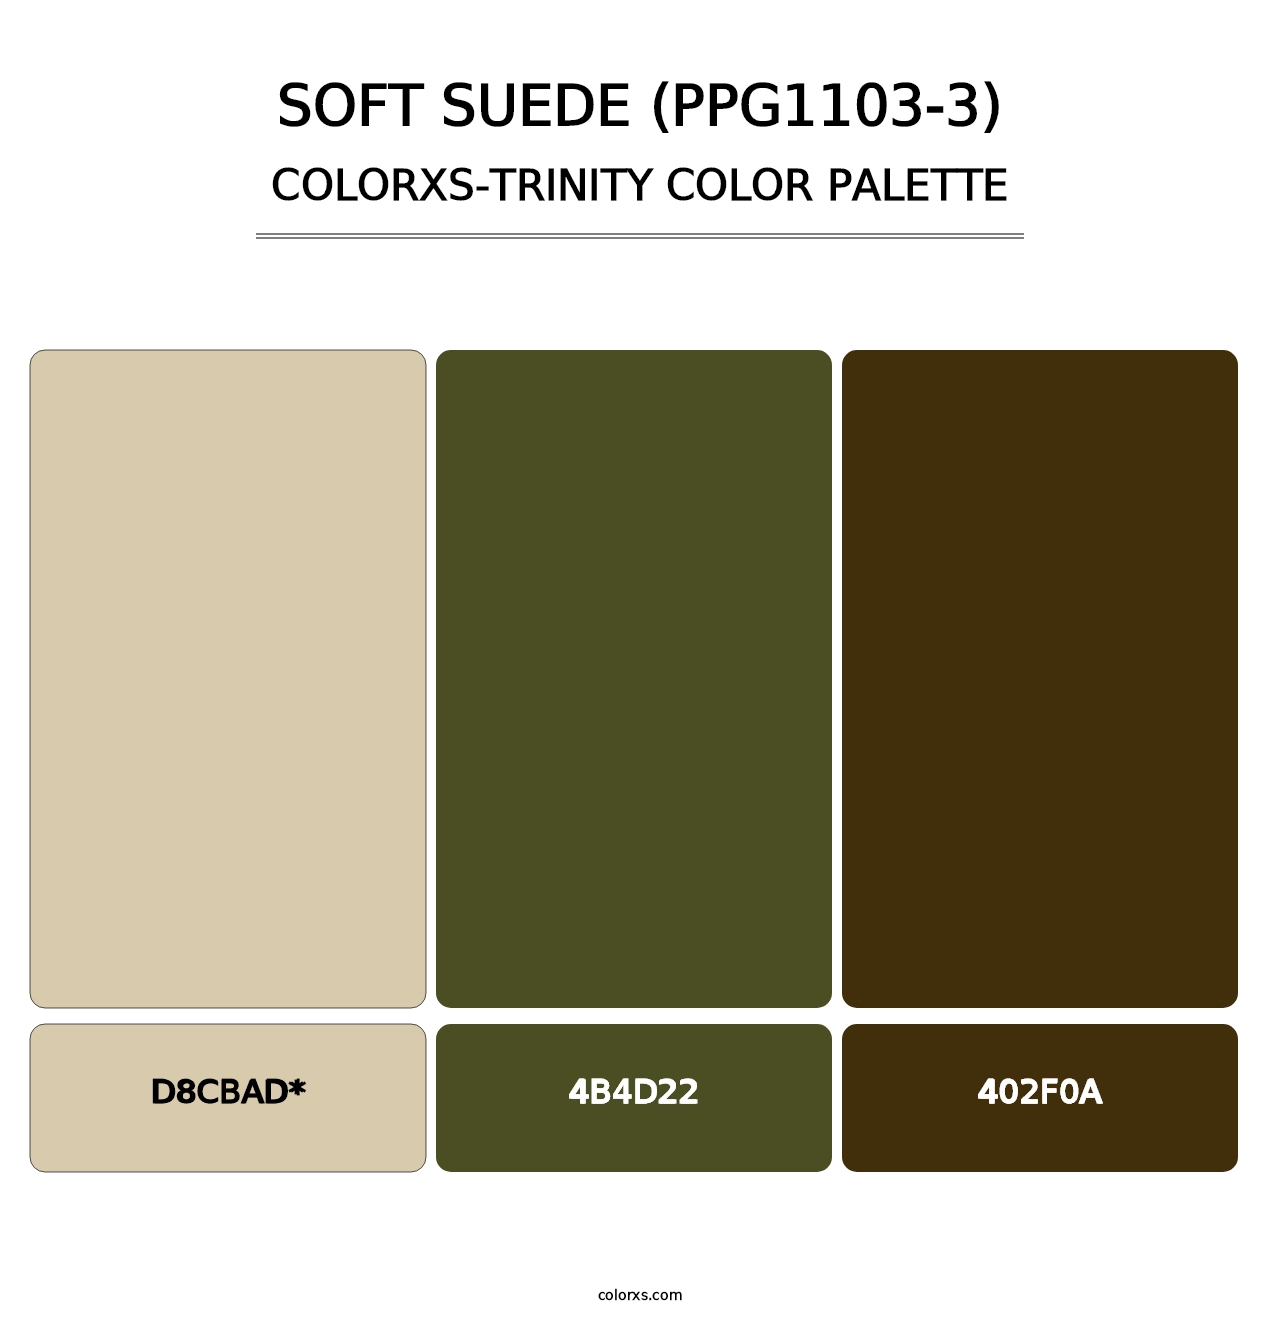 Soft Suede (PPG1103-3) - Colorxs Trinity Palette